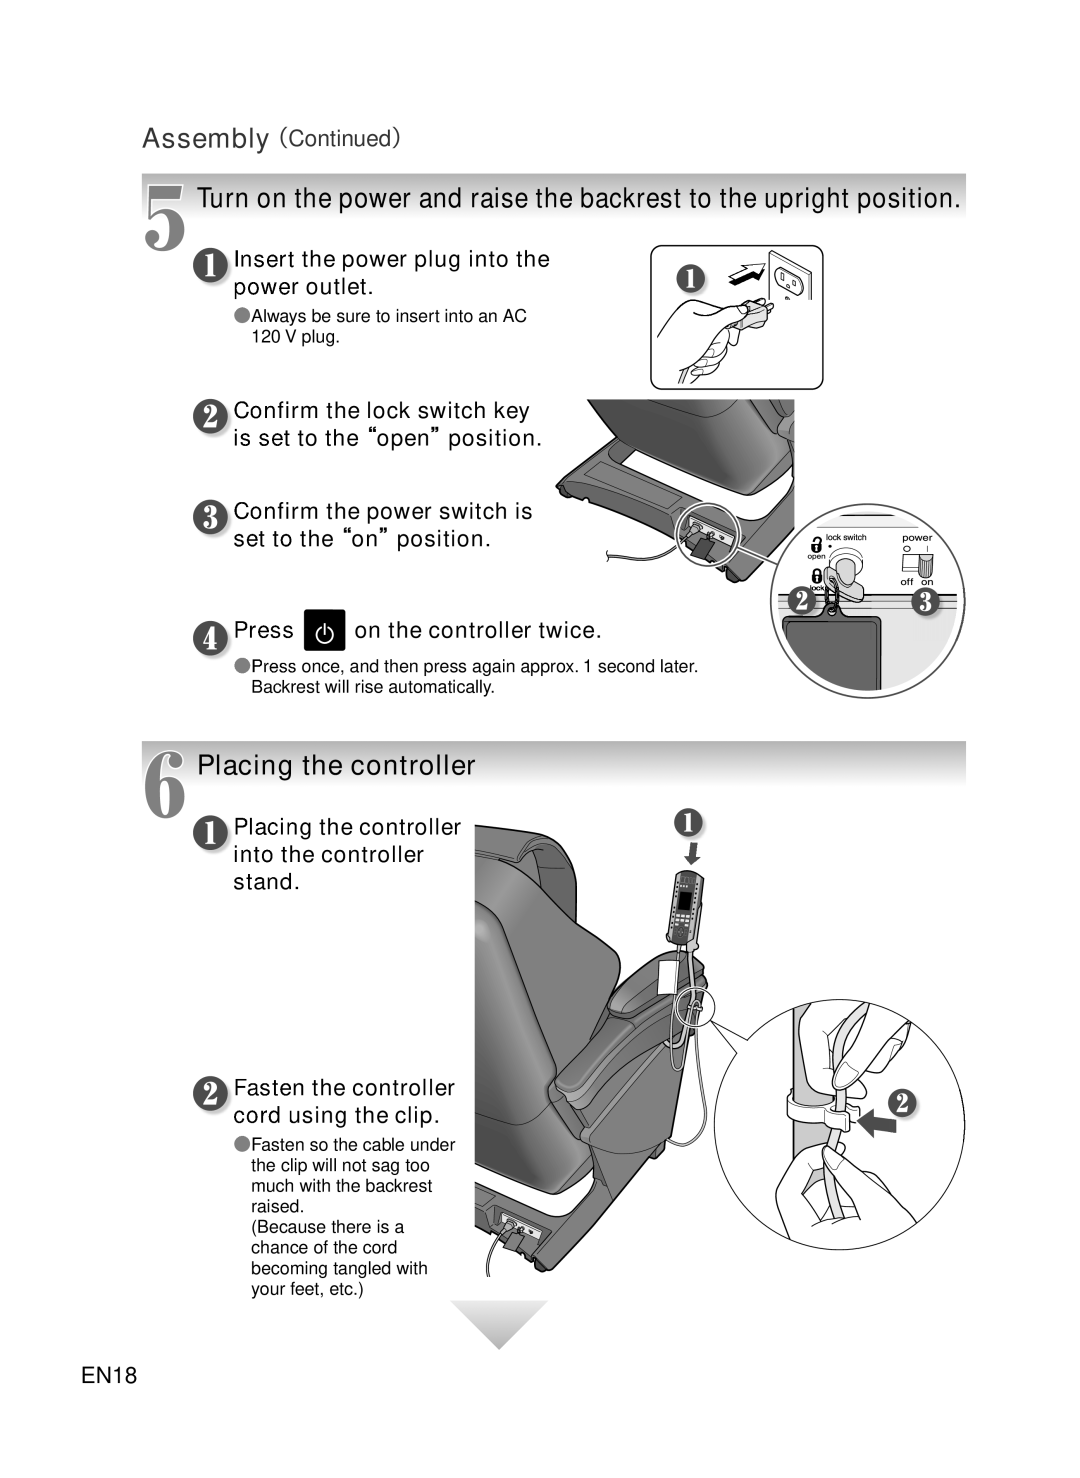 Panasonic EP-MA73 Assembly, Placing the controller, Turn on the power and raise the backrest to the upright position, EN18 